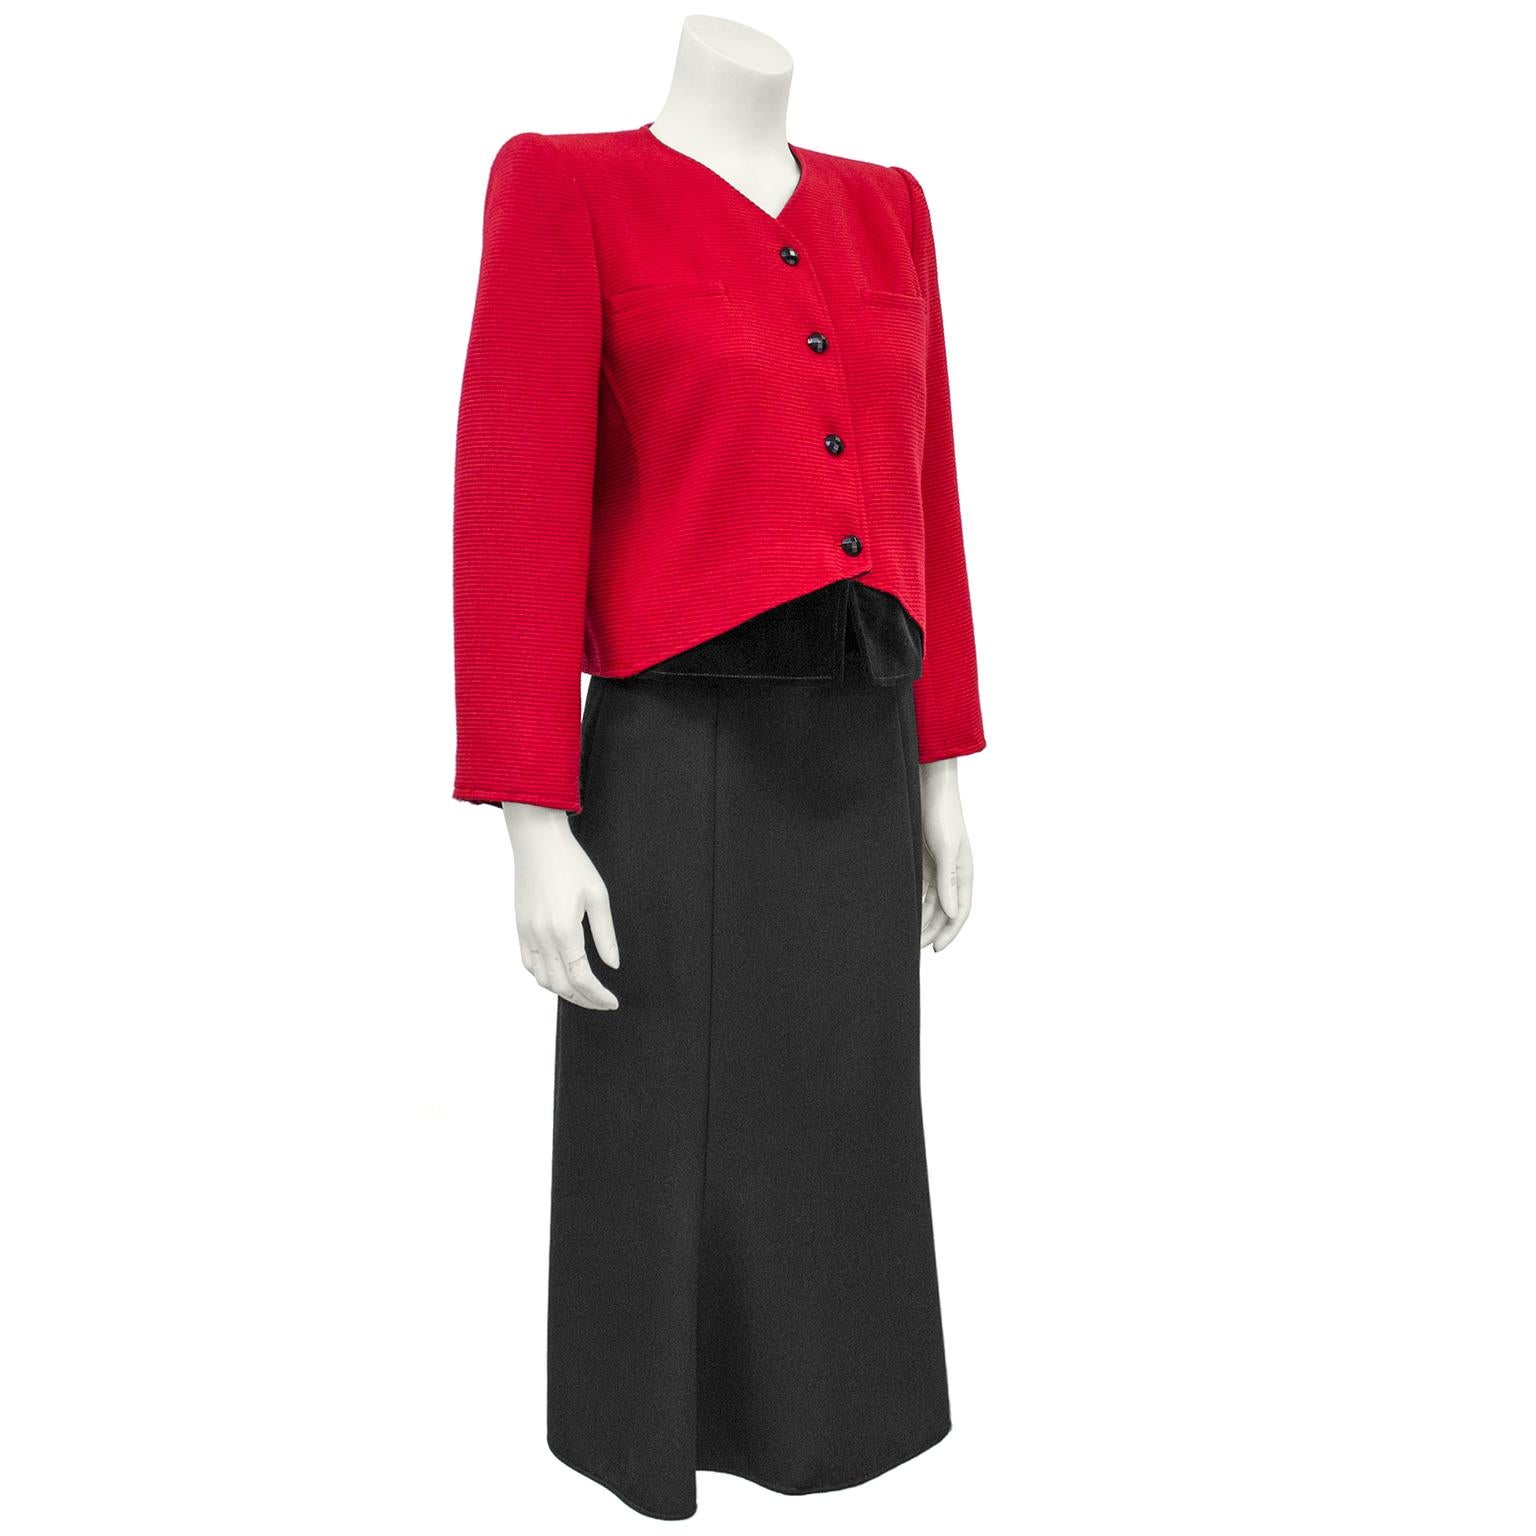 1980s Valentino midi skirt suit with velvet details. The collarless jacket is made of a horizontally ribbed red fabric with two front pockets on the bust and black faceted buttons down the front. The front hem of the jacket features a cut away